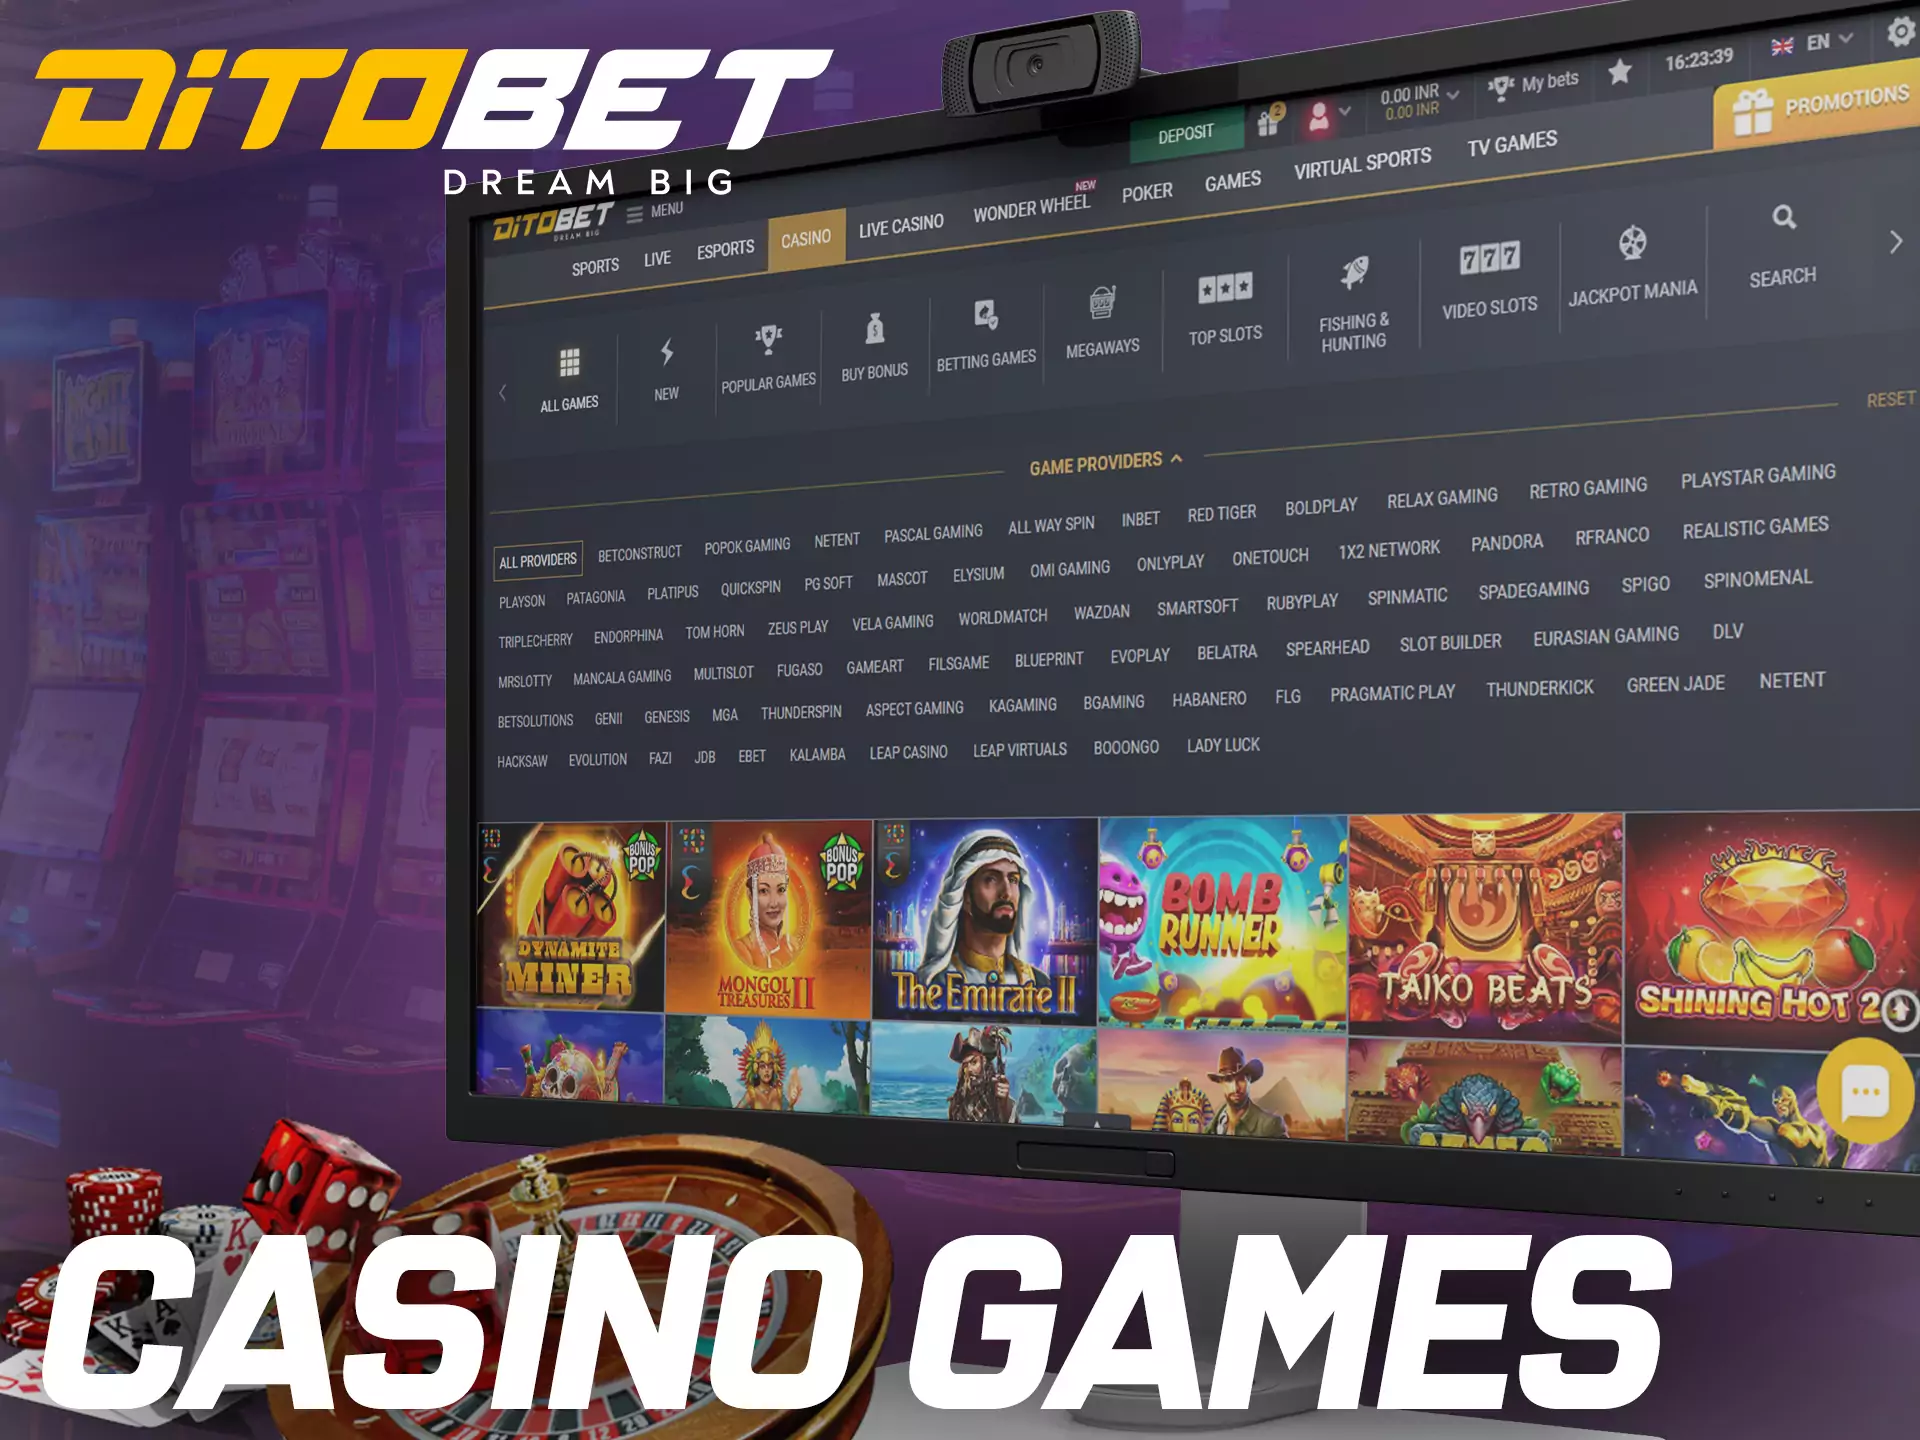 Ditobet offers a huge selection of casino games for your entertainment.